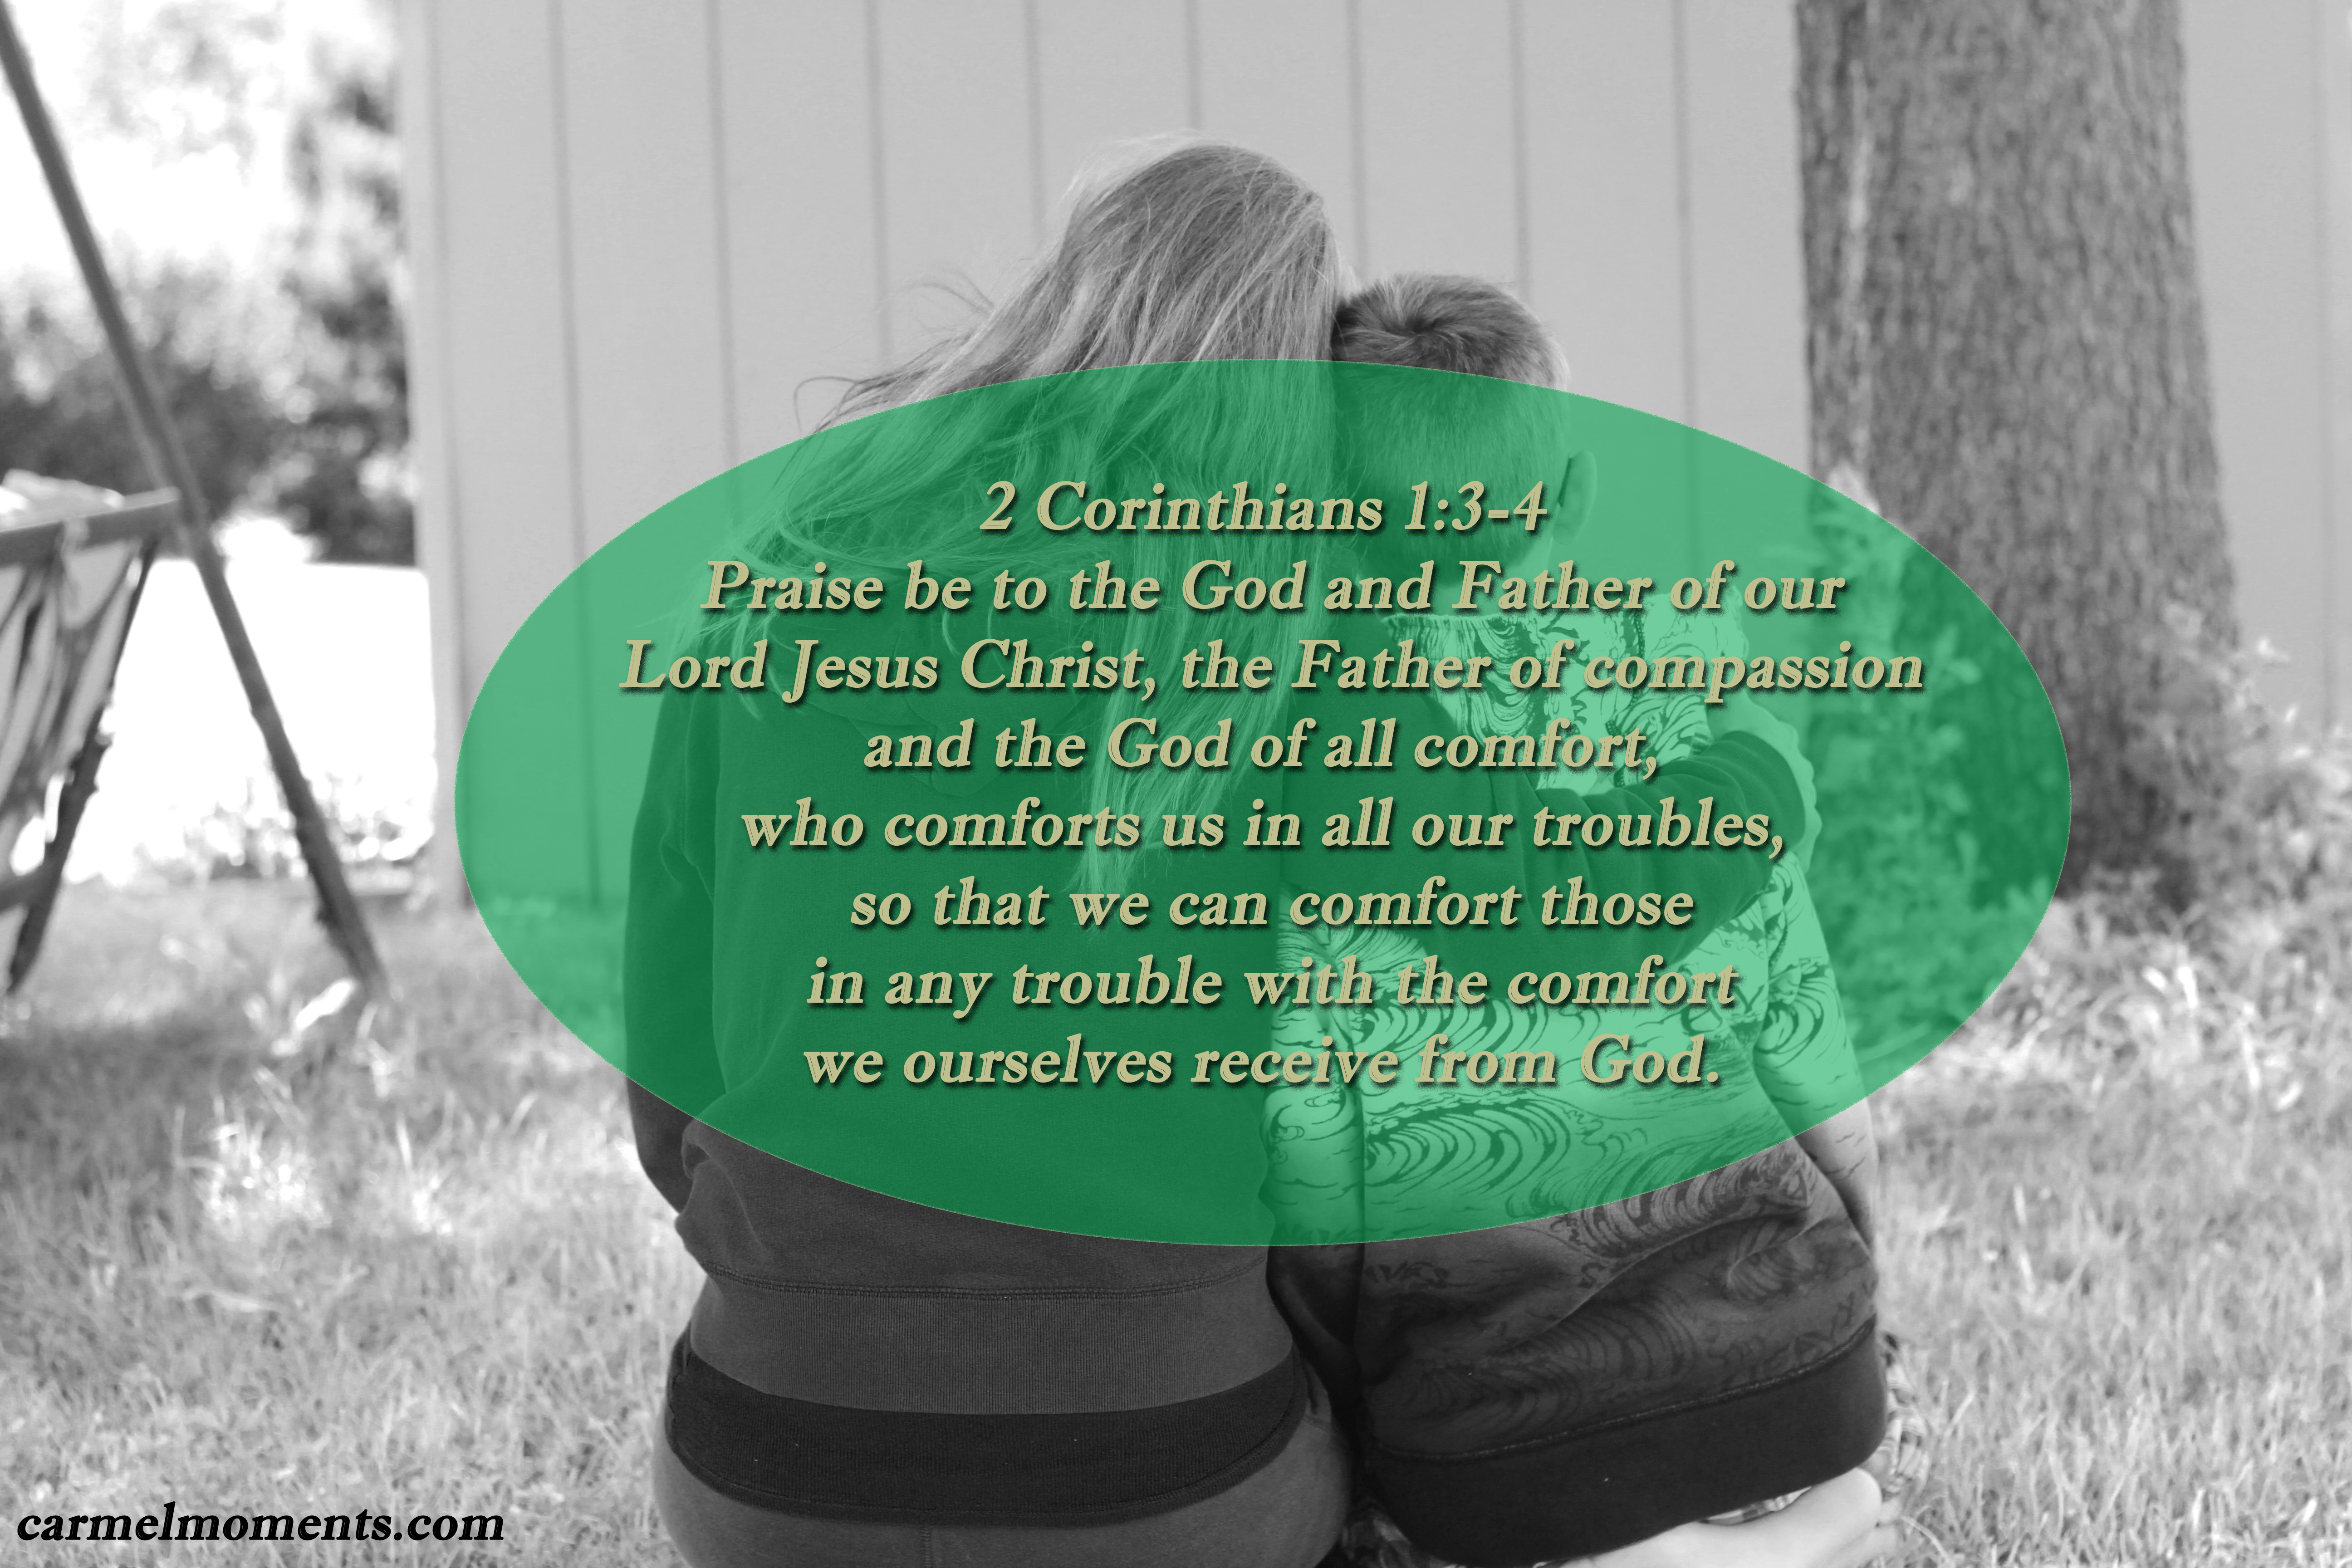 2 Corinthians 1:3-4 Praise be to the God and Father of our Lord Jesus Christ, the Father of compassion and the God of all comfort, who comforts us in all our troubles, so that we can comfort those in any trouble with the comfort we ourselves receive from God.